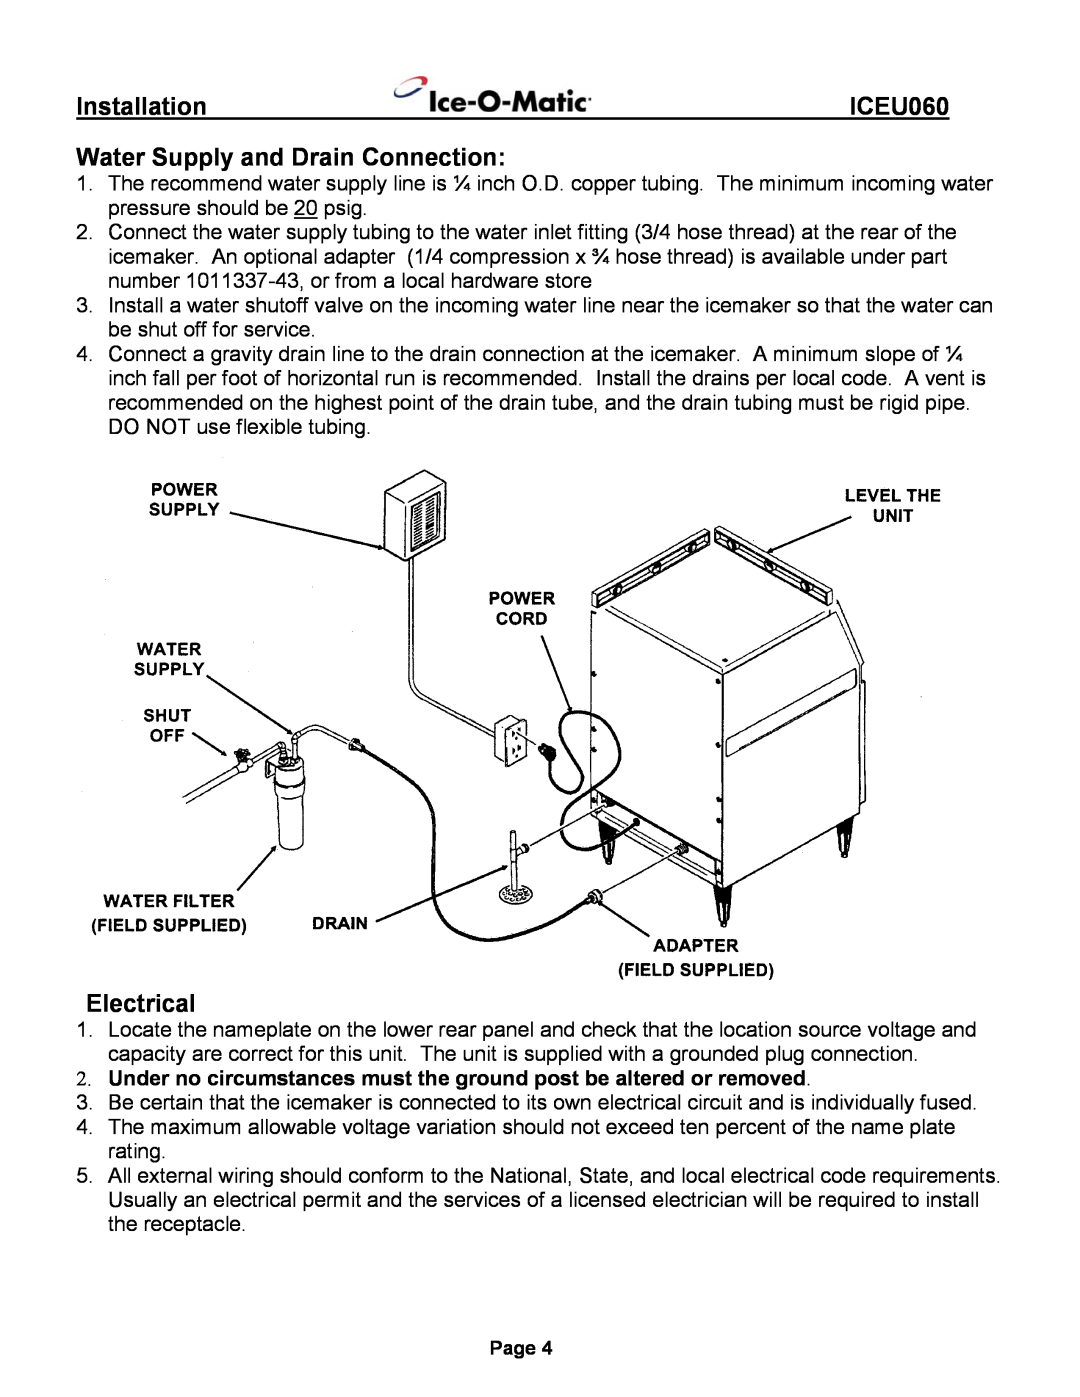 Ice-O-Matic ICEU060 installation manual Water Supply and Drain Connection, Electrical, Installation 